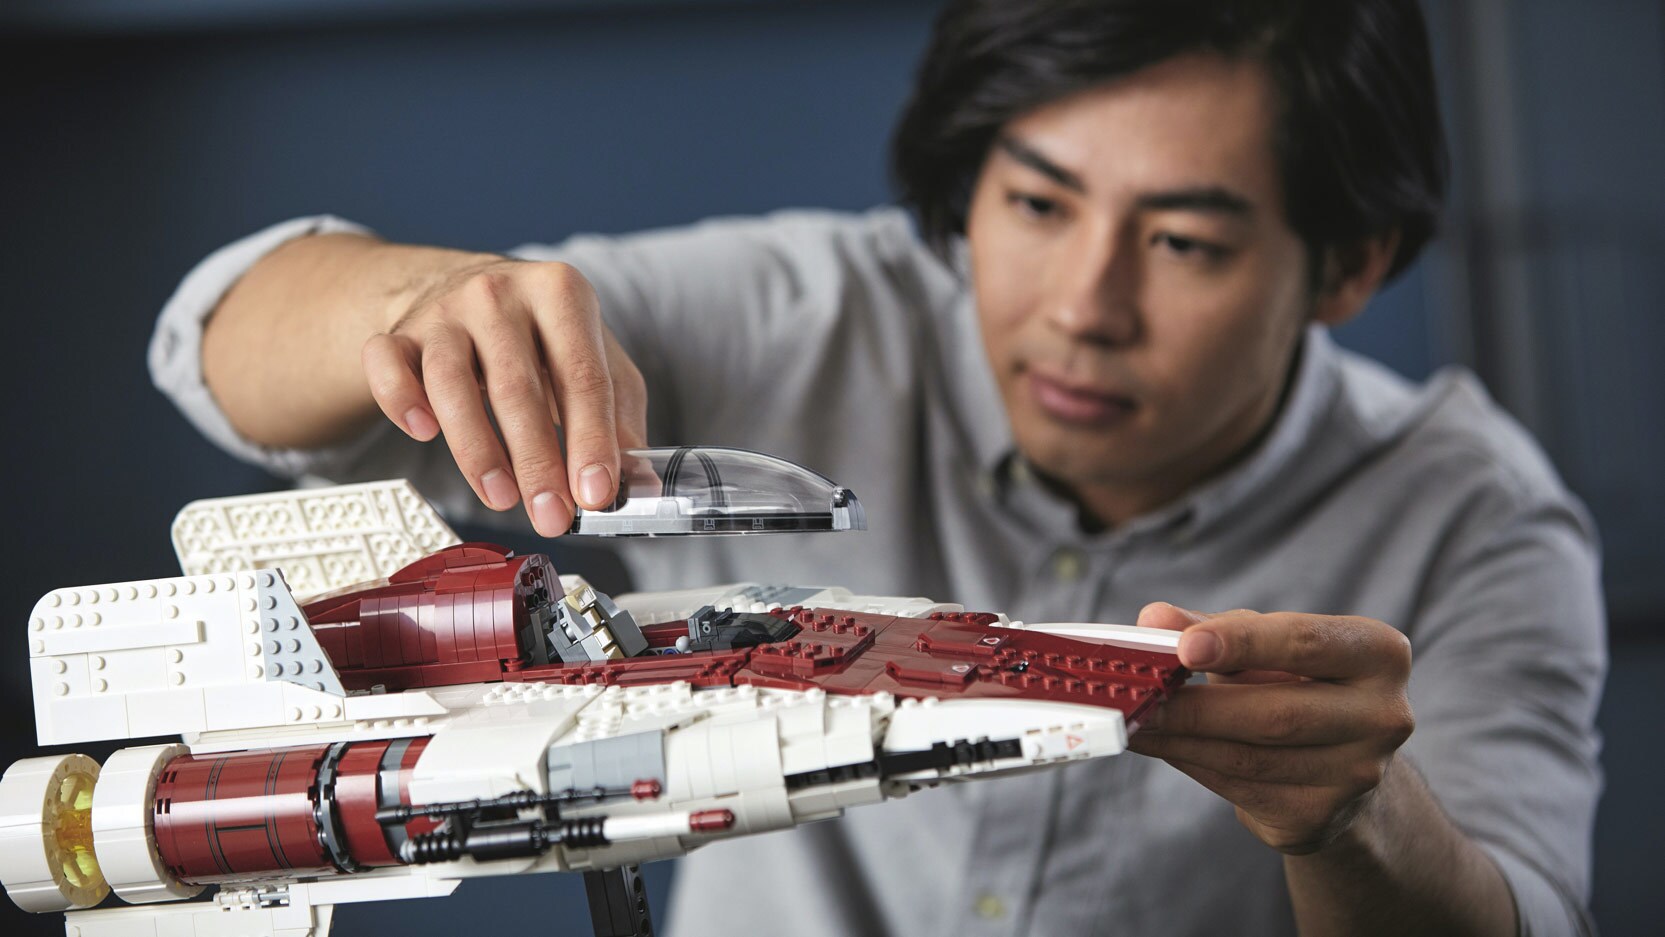 Battle The Empire with The New LEGO® Star Wars™ A-Wing Starfighter™ construction set